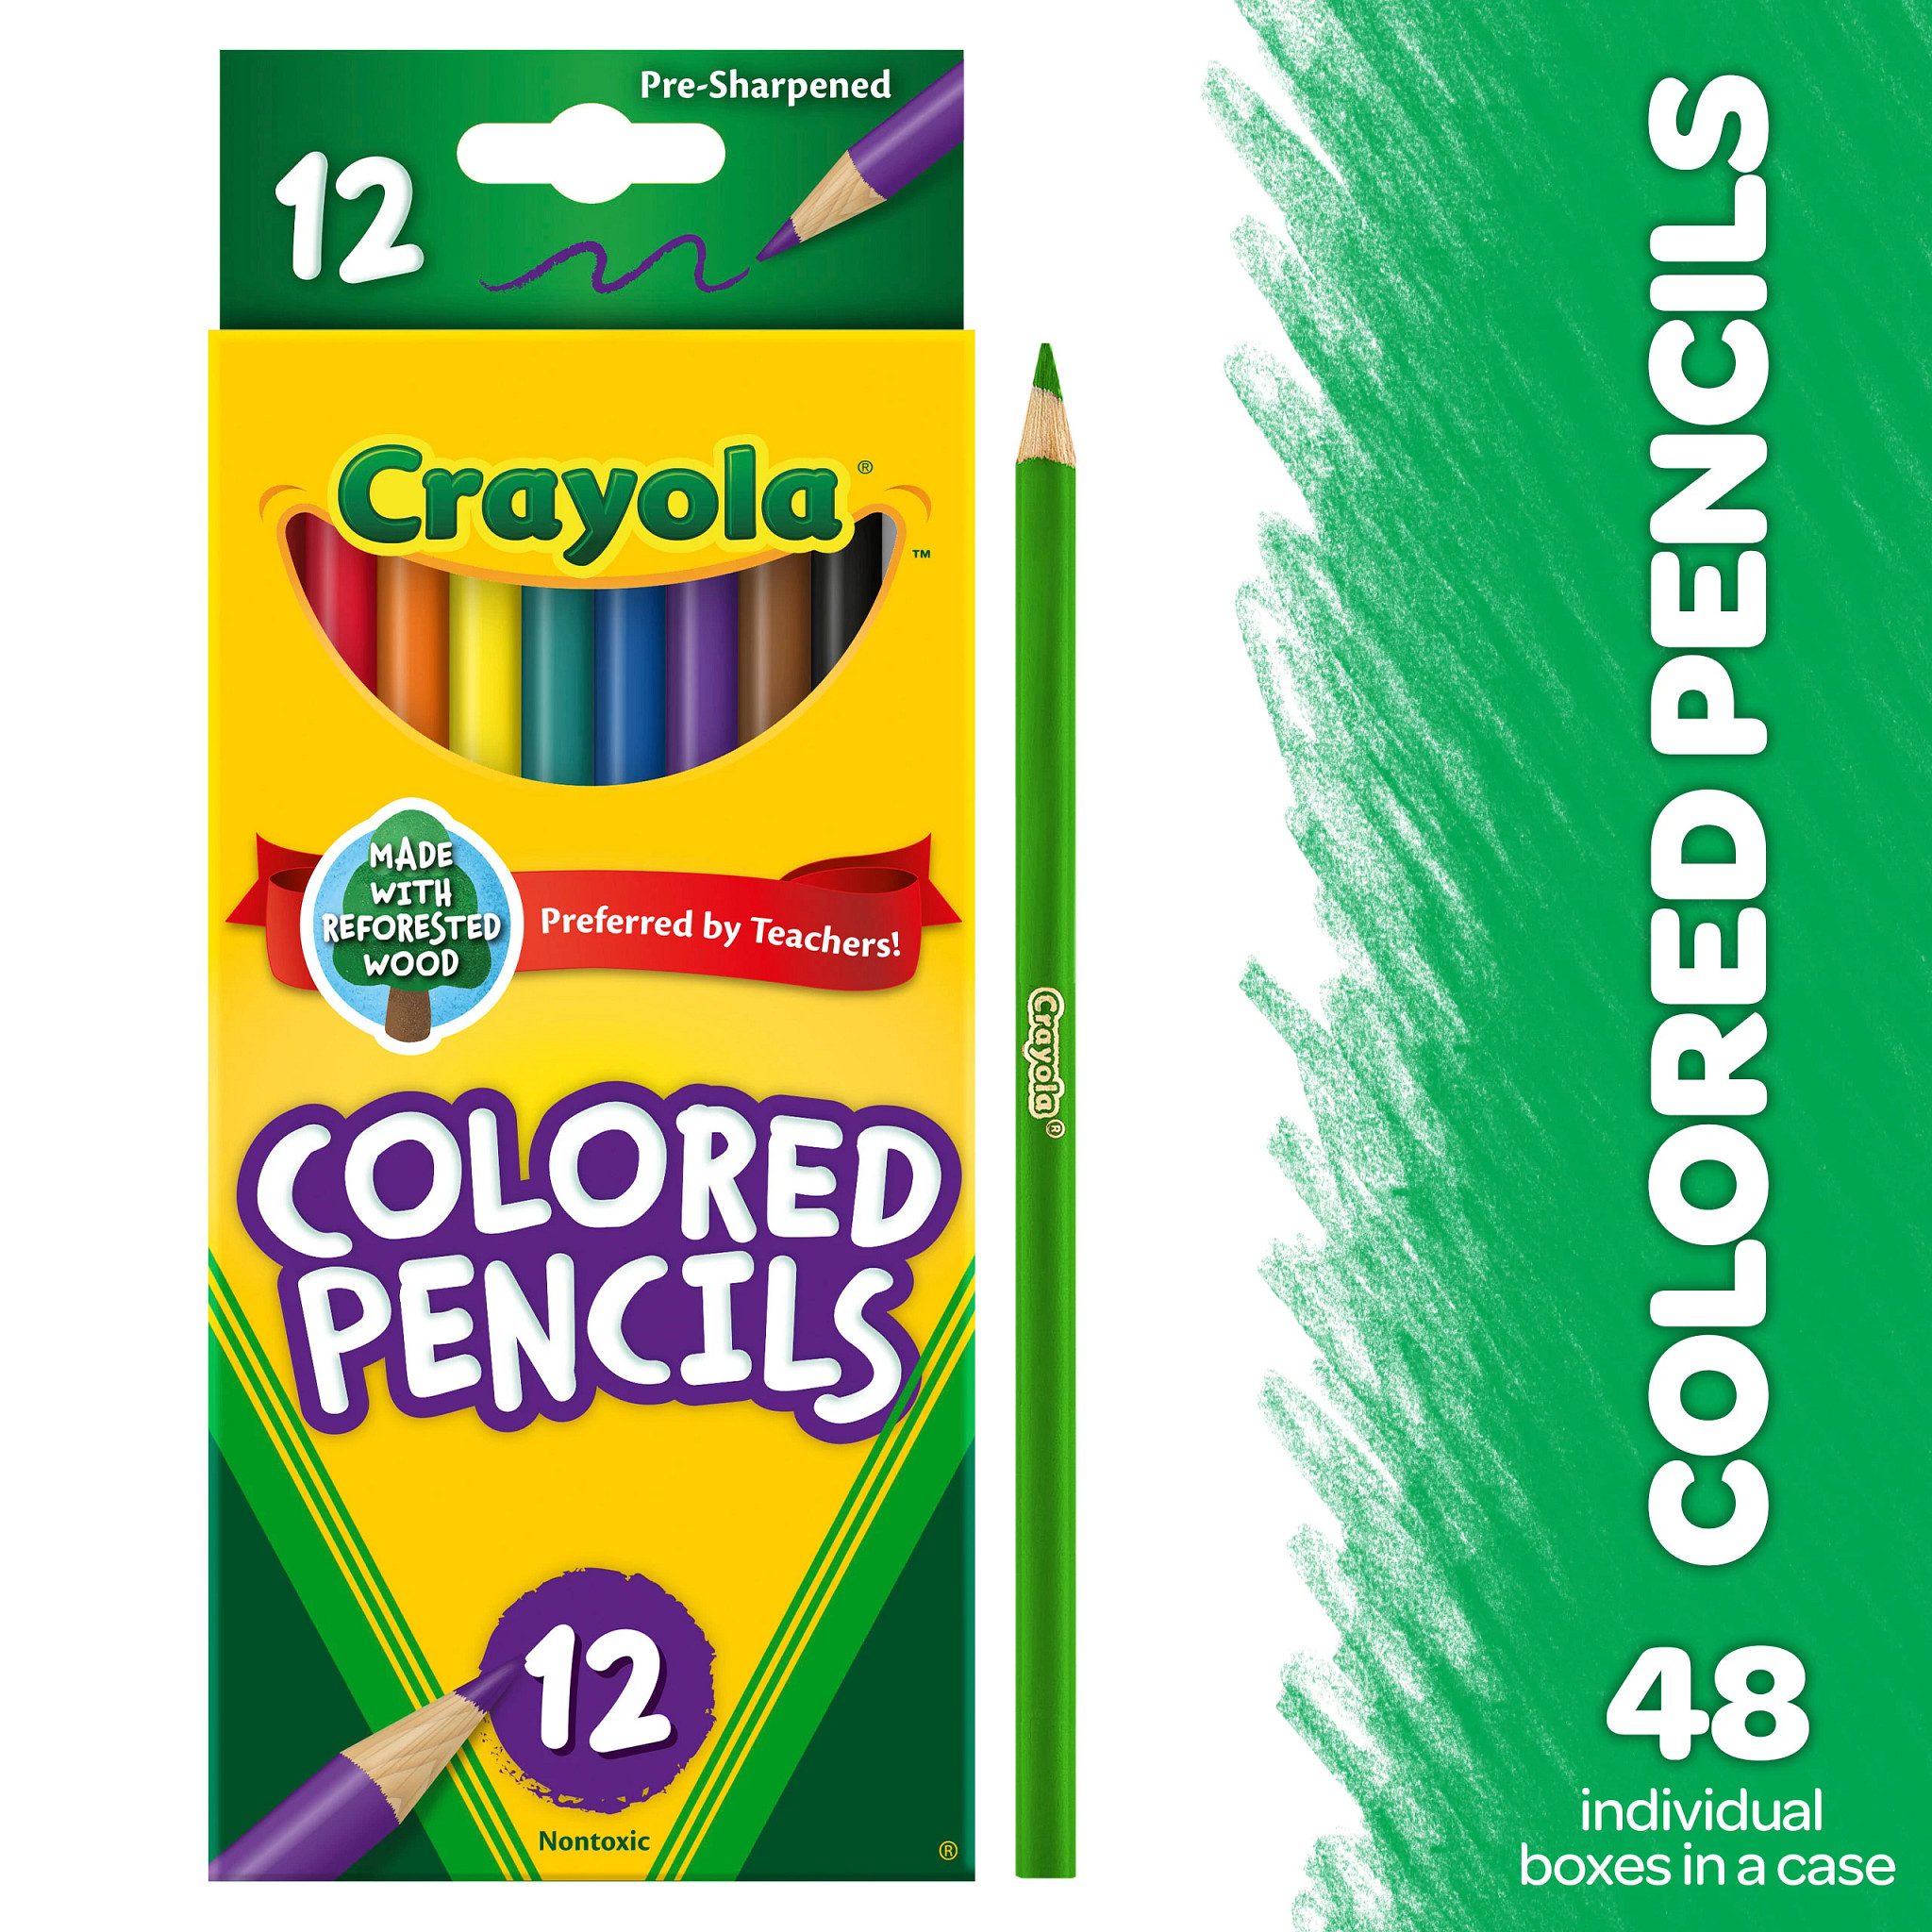 Crayola 12ct Colored Pencils, Assorted Colors, Pre-sharpened, (Case  Contains 48 Packs), Bulk School Supplies